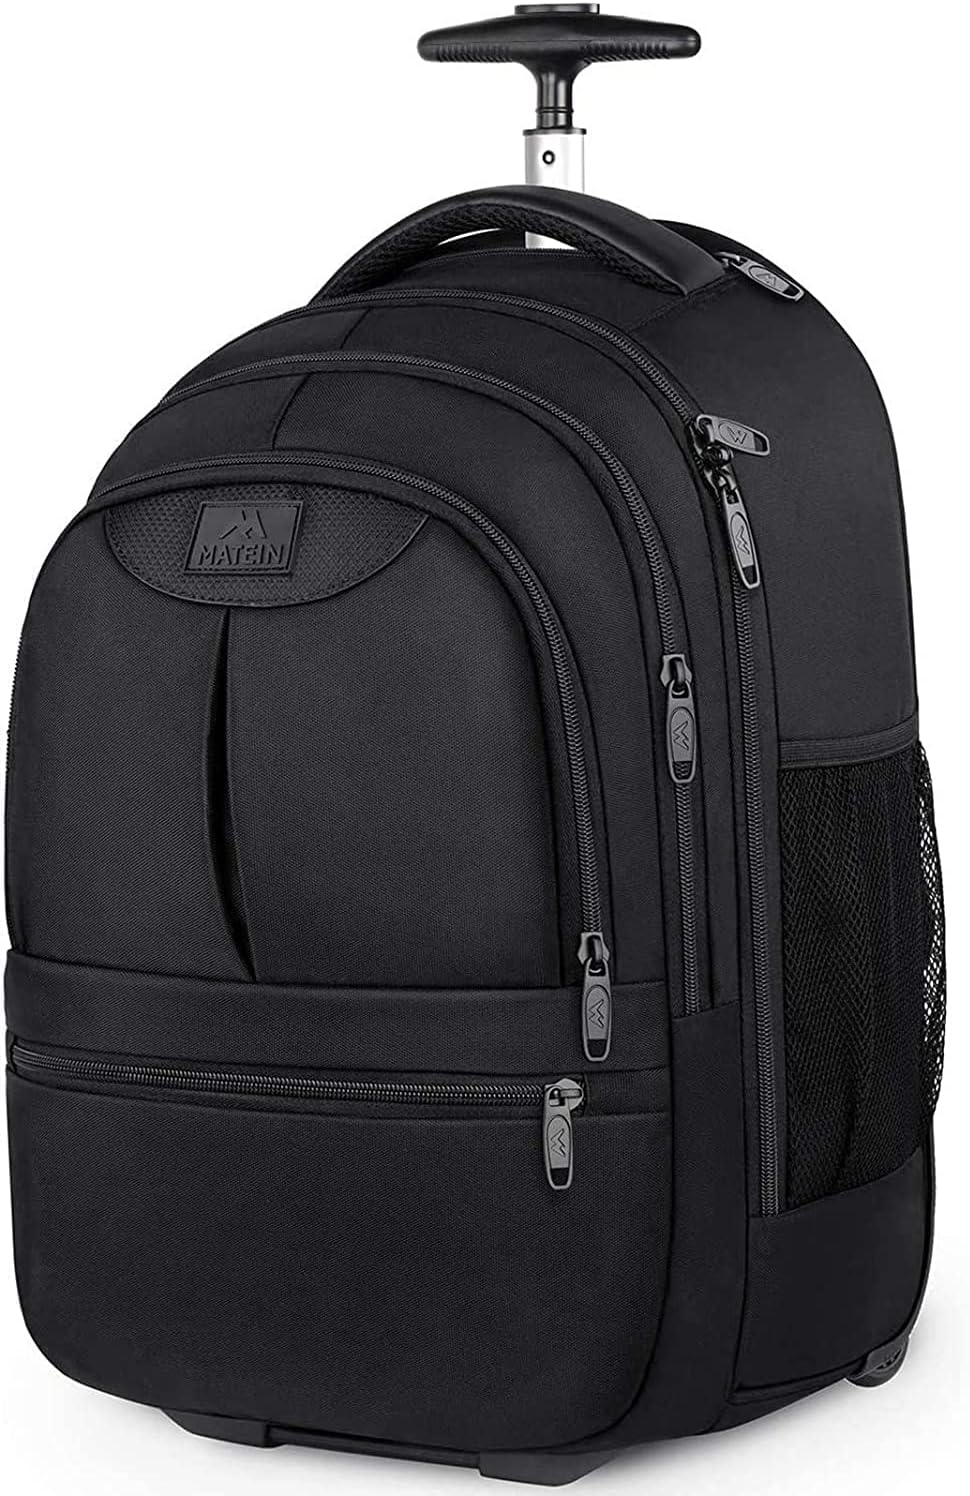 MATEIN Rolling Travel Backpack, Durable 17 inch Laptop [...]